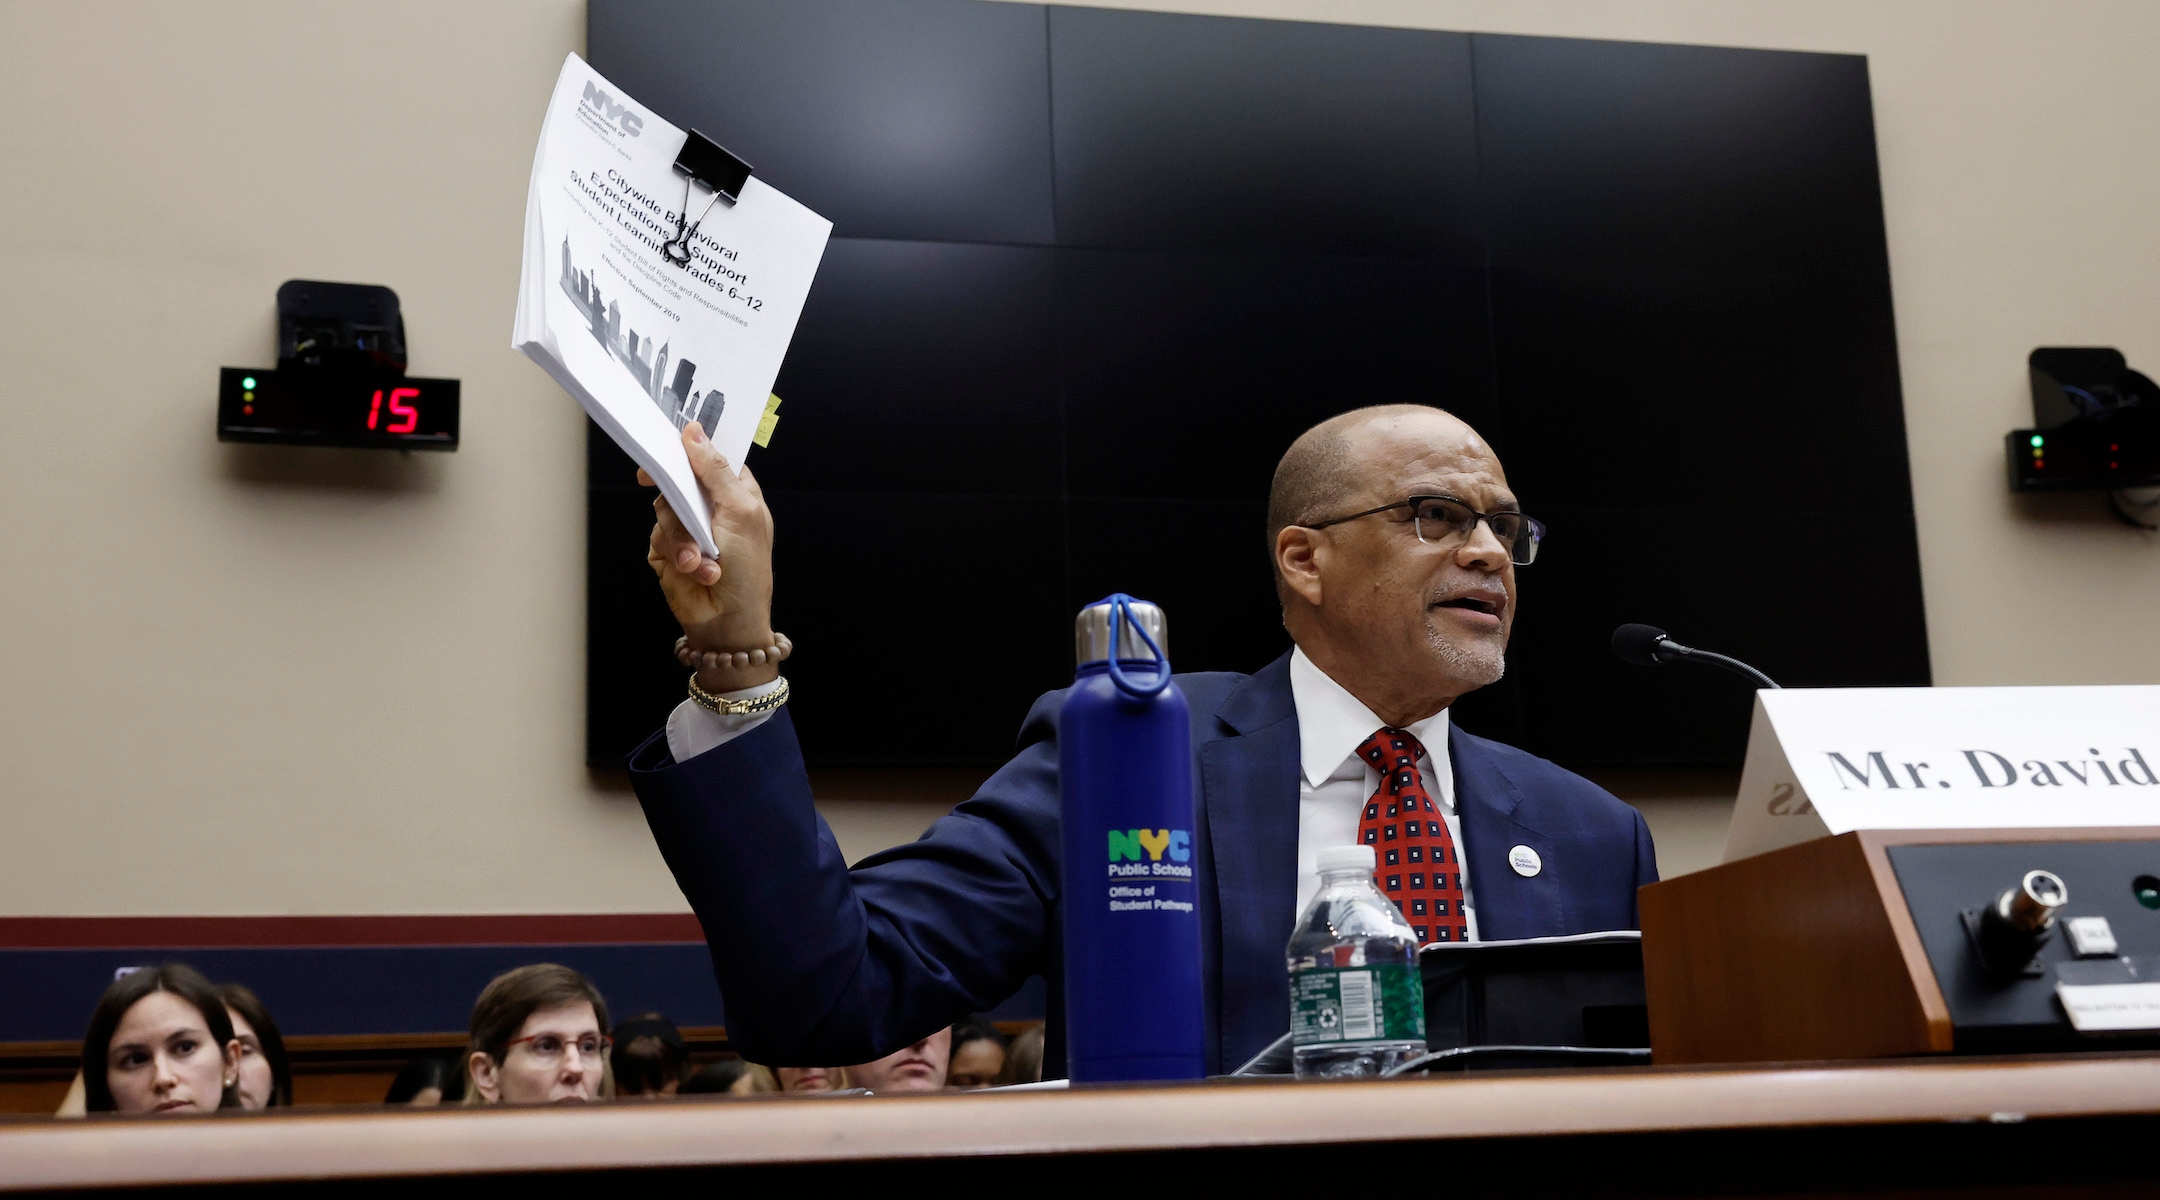 David Banks, Chancellor of New York City Public Schools, speaks during a hearing with subcommittee members of the House Education and the Workforce Committee in the Rayburn House Office Building in Washington, D.C., May 8, 2024. (Anna Moneymaker/Getty Images)